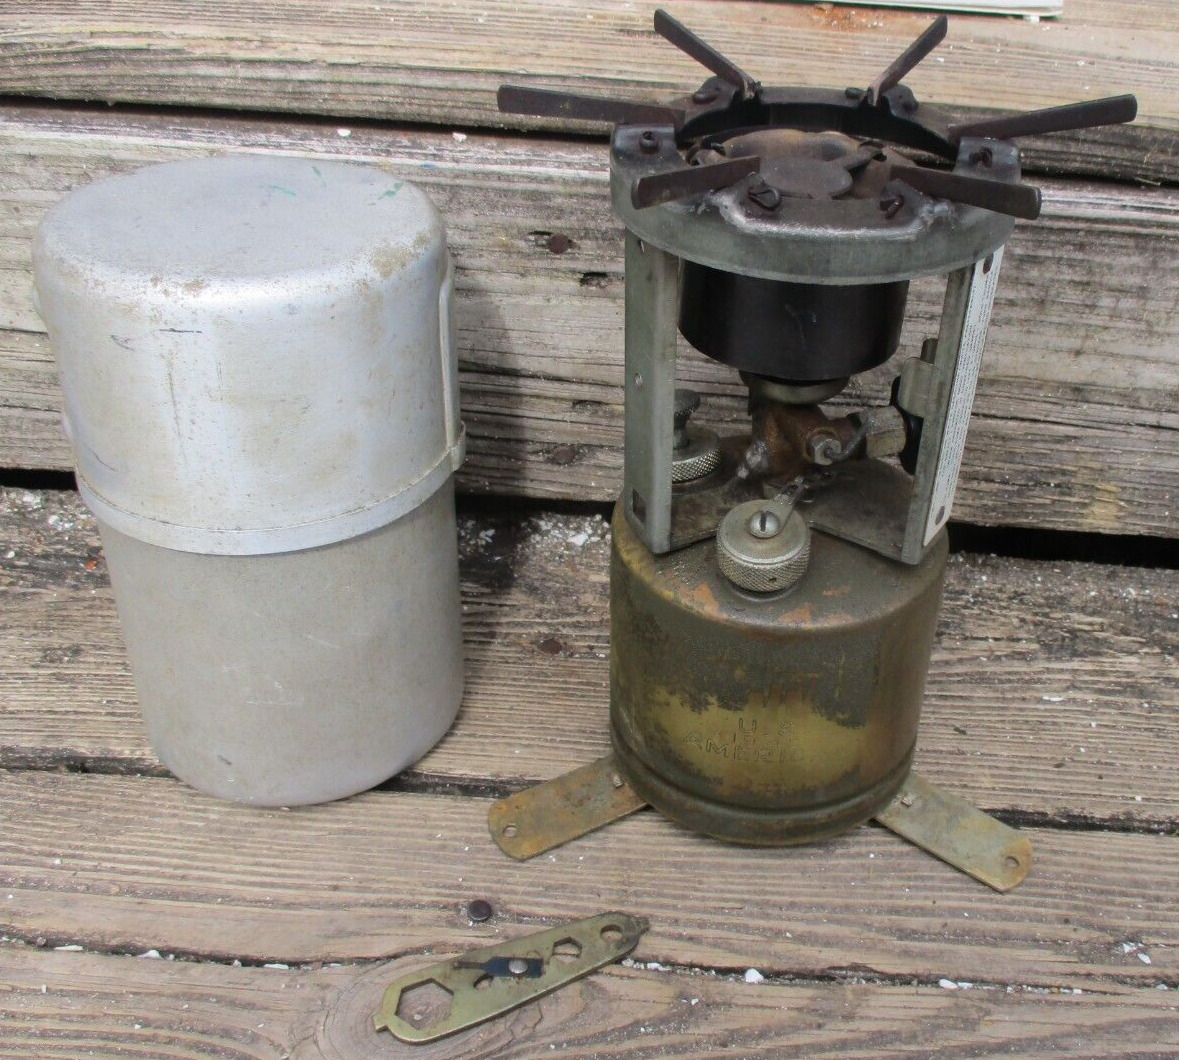 1945 WWII US Military Gas Pocket Stove Camp American w/ Aluminum Case CM Mfg Co